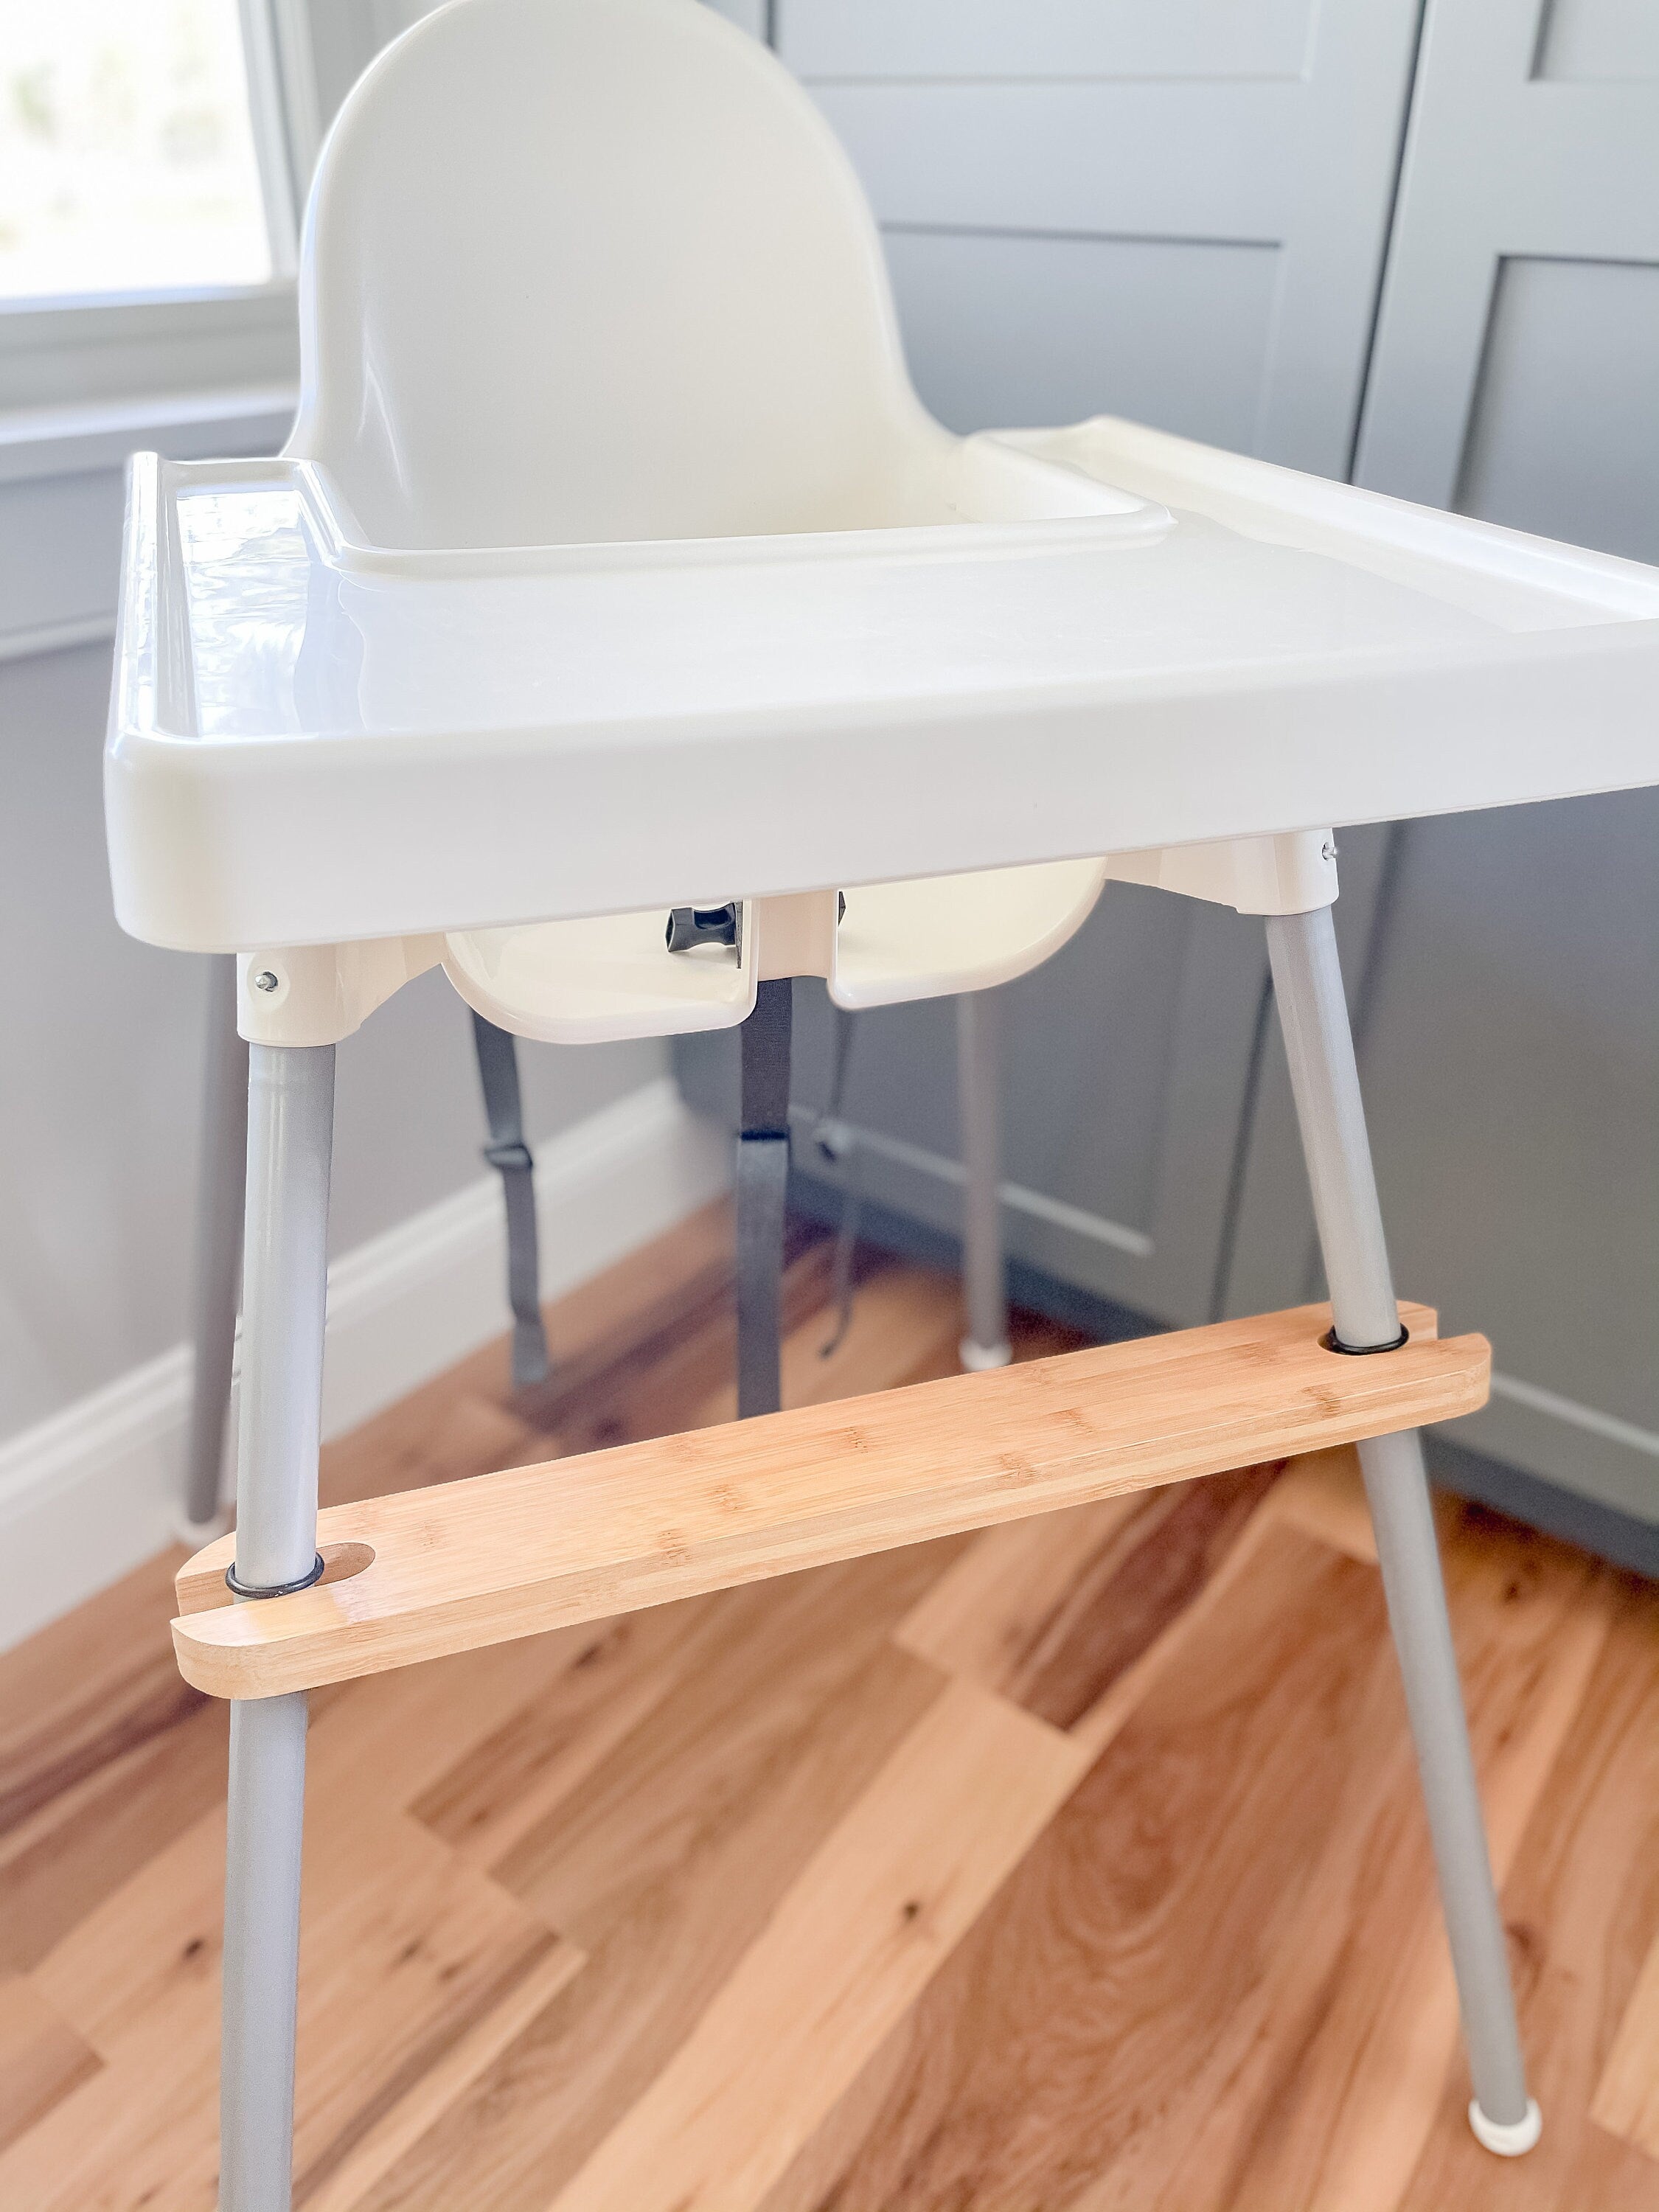 IKEA High Chair Foot Rest - Wood, Perfect for weaning